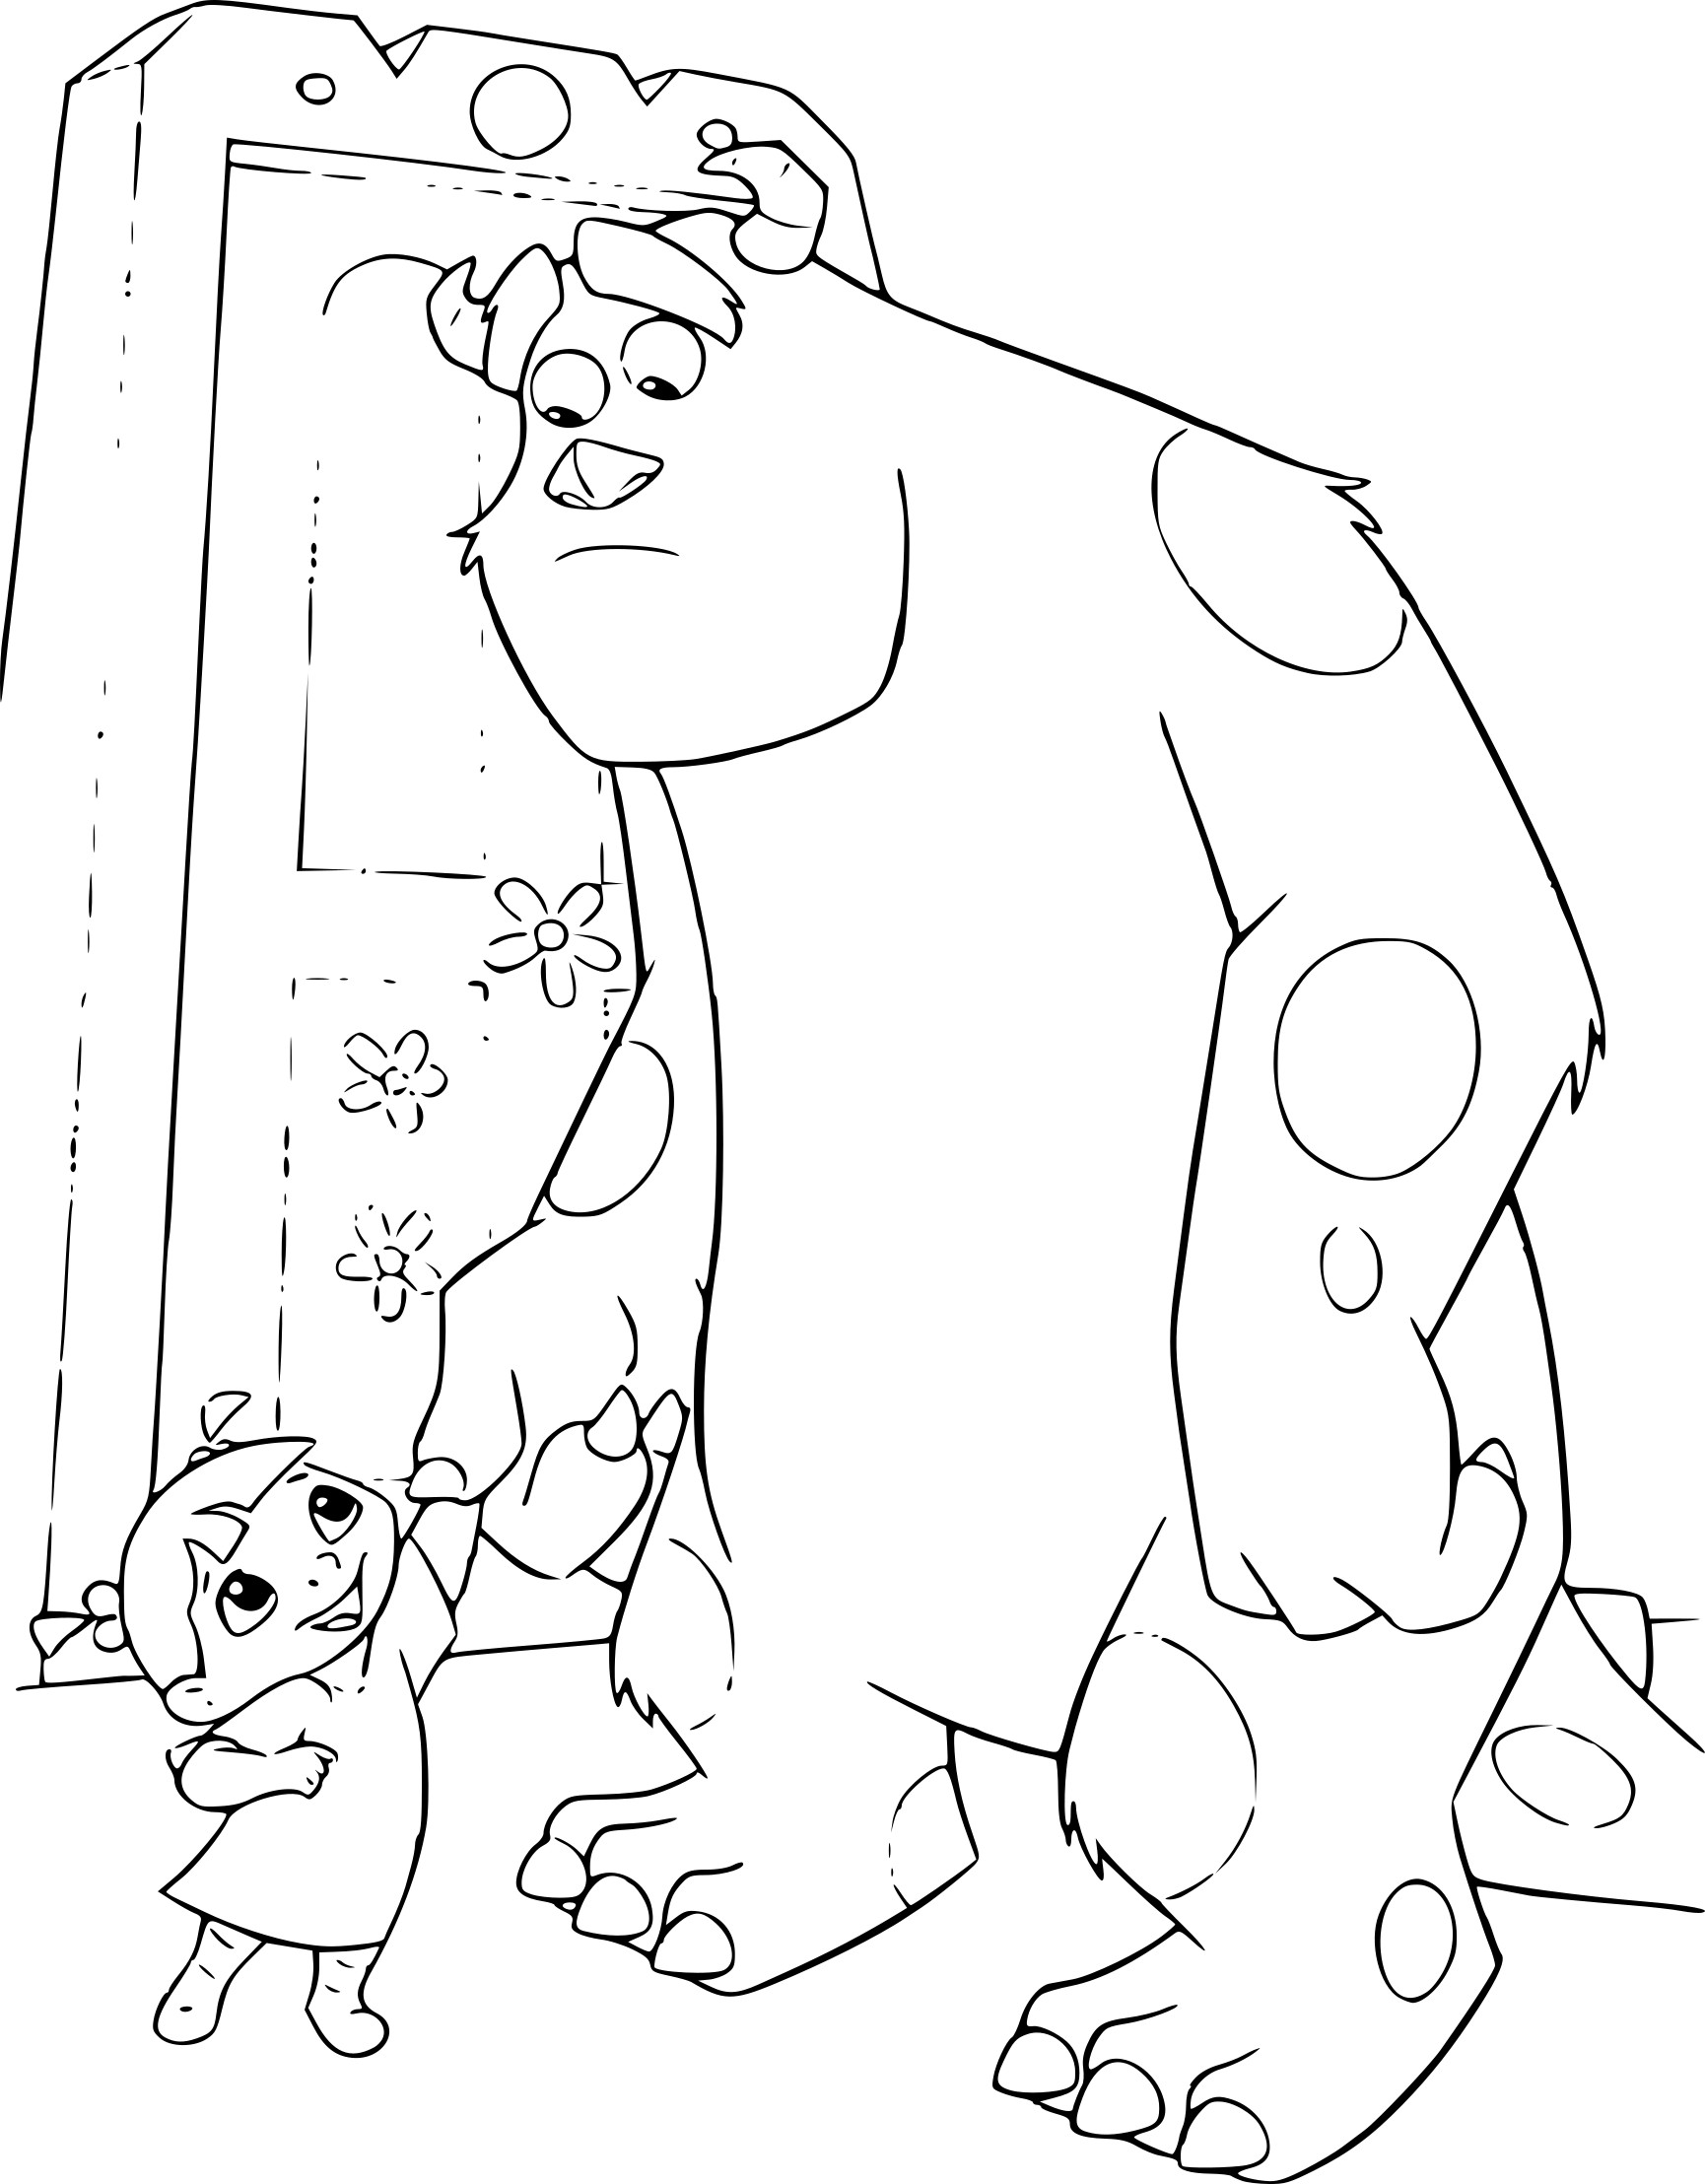 Monsters And Co coloring page